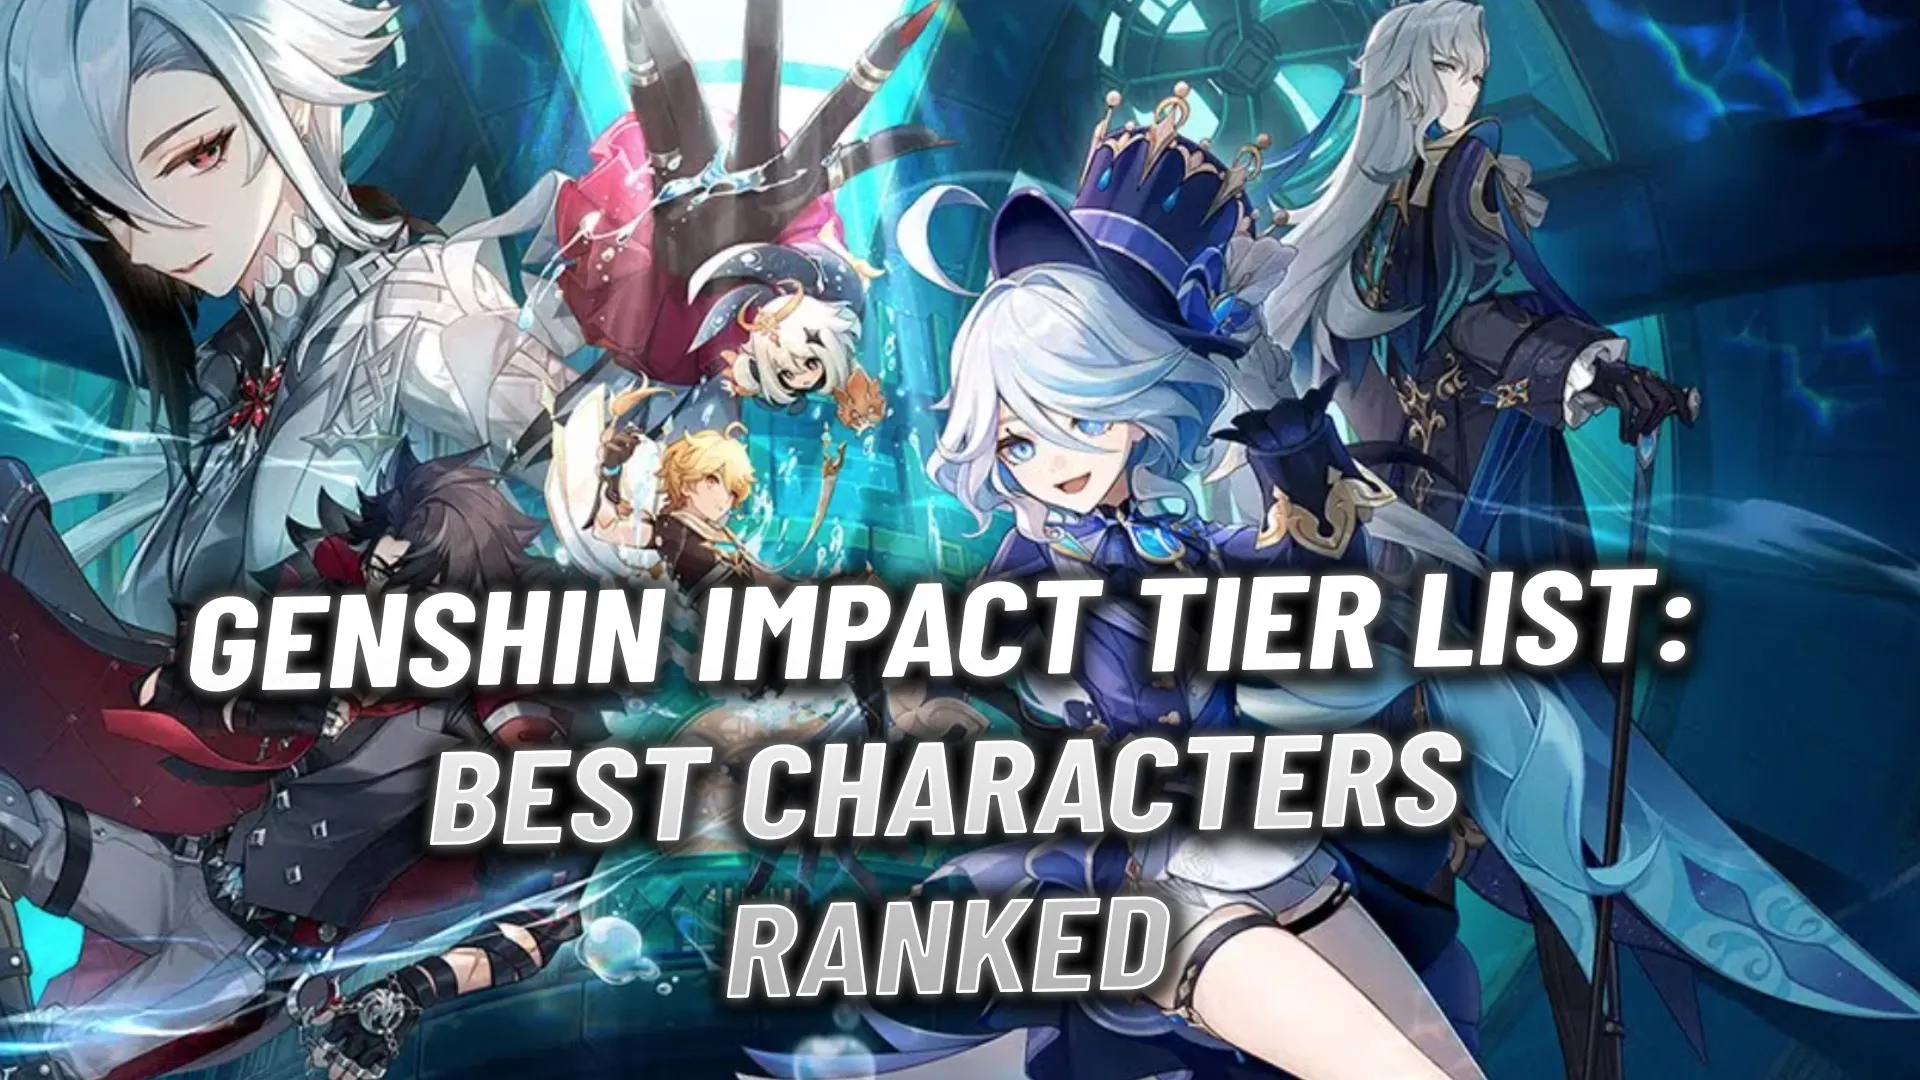 Genshin Impact Hydro characters ranked from worst to best